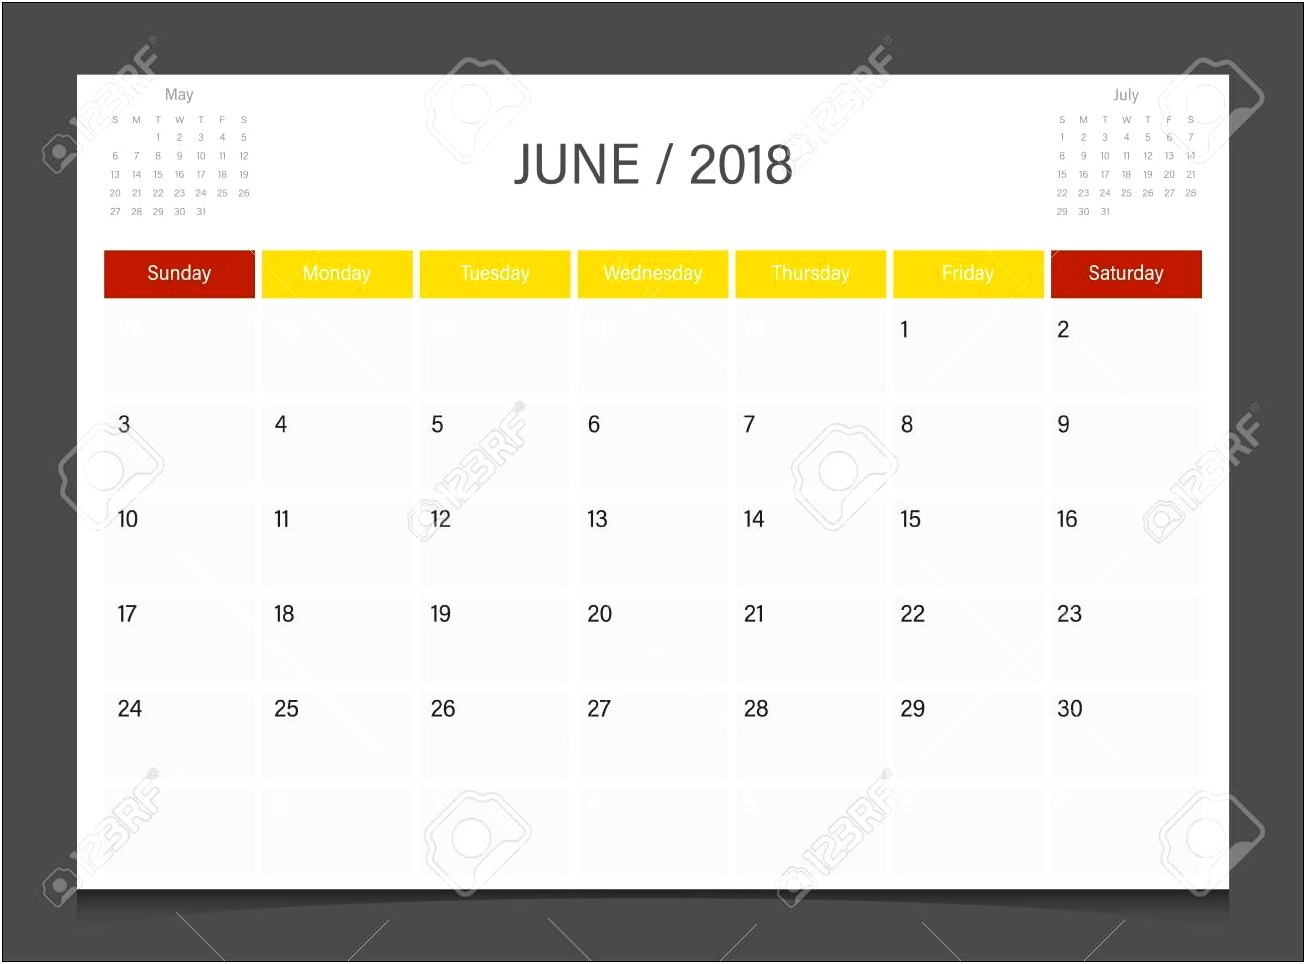 Free Weekly Class Schedule Template June 2018